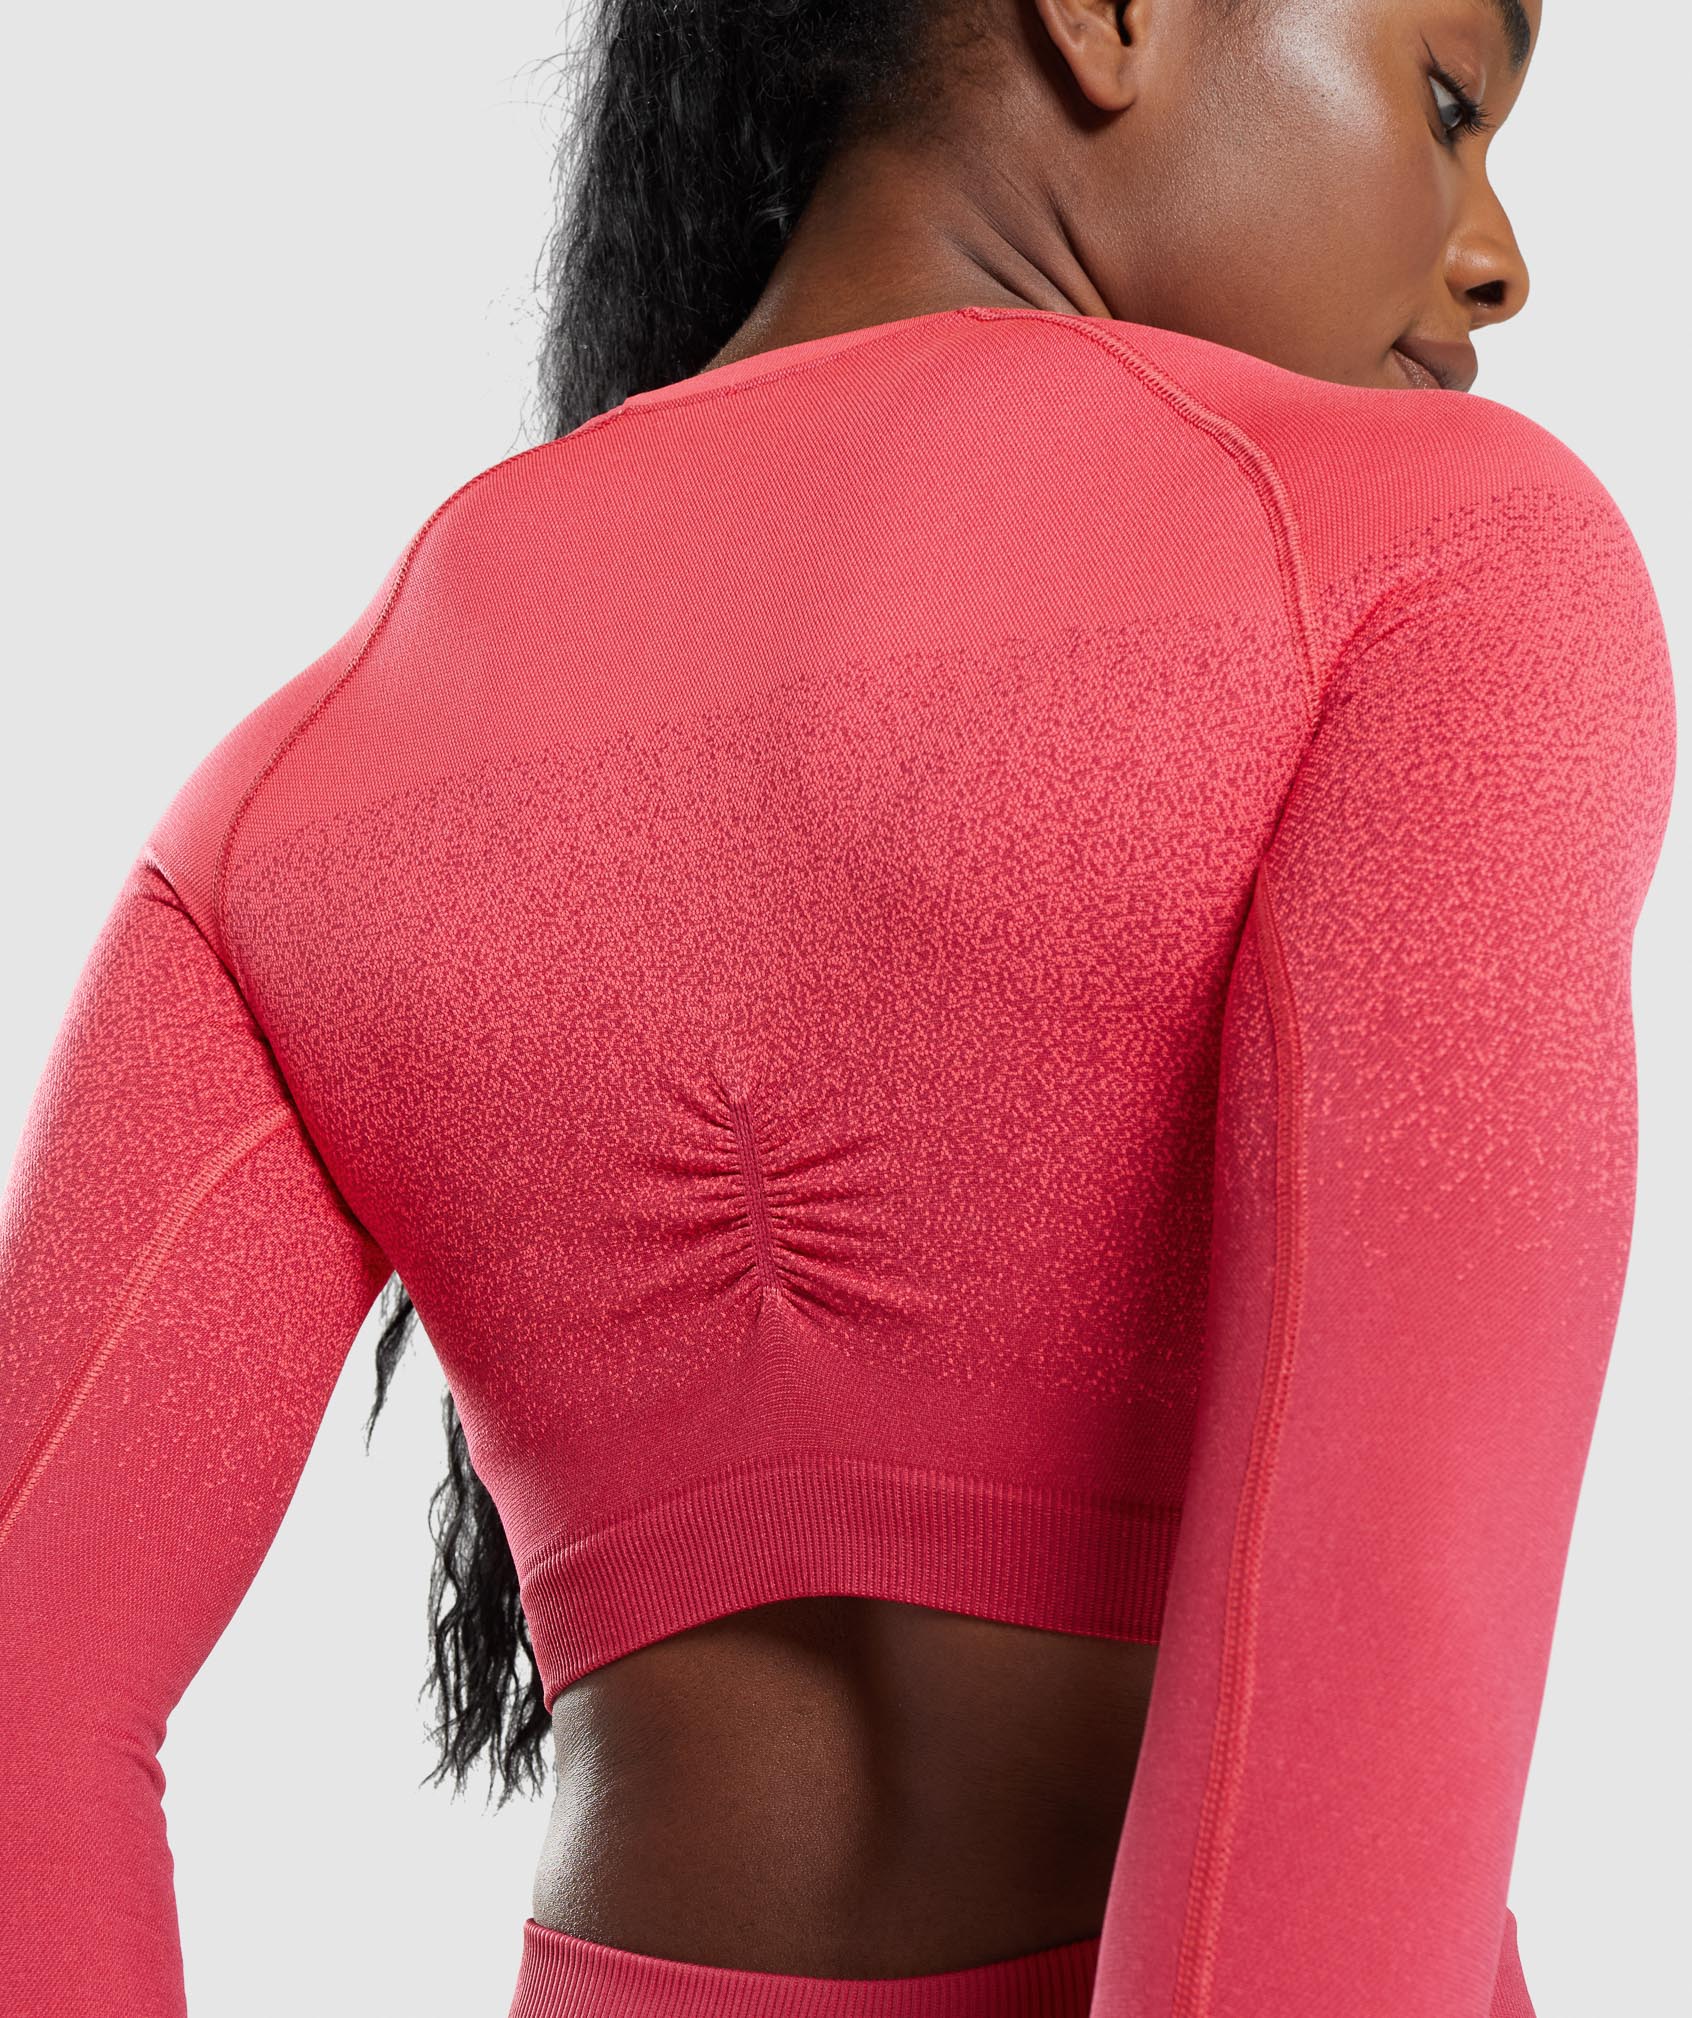 Adapt Ombre Seamless Long Sleeve Crop Top in Pink/Red